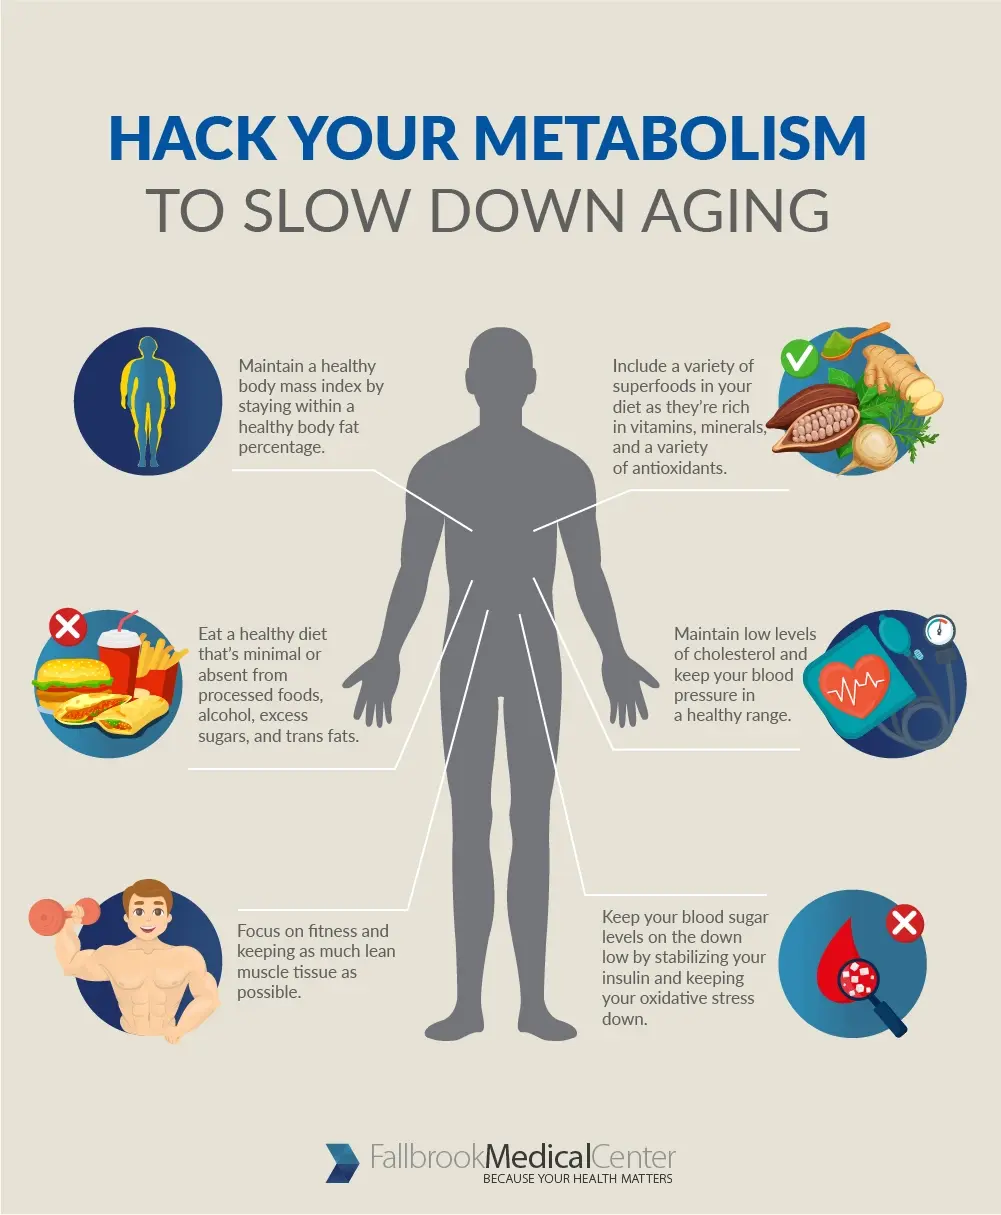 Hack your Metabolism to Slow Down Aging